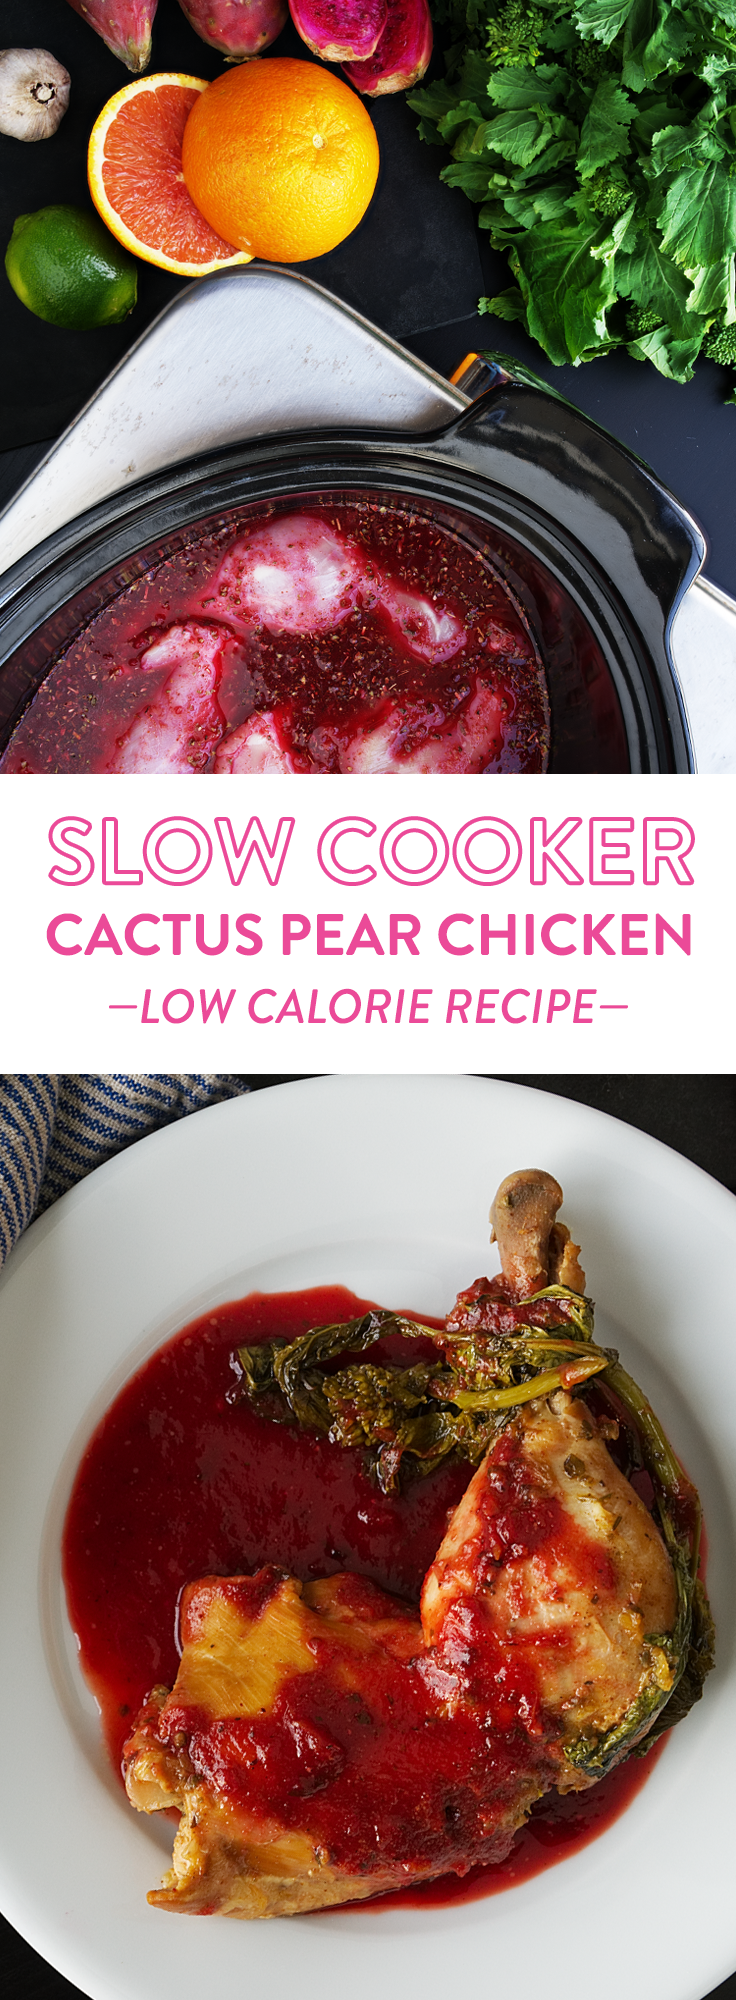 Slow Cooker Cactus Pear Chicken with Broccoli Rabe